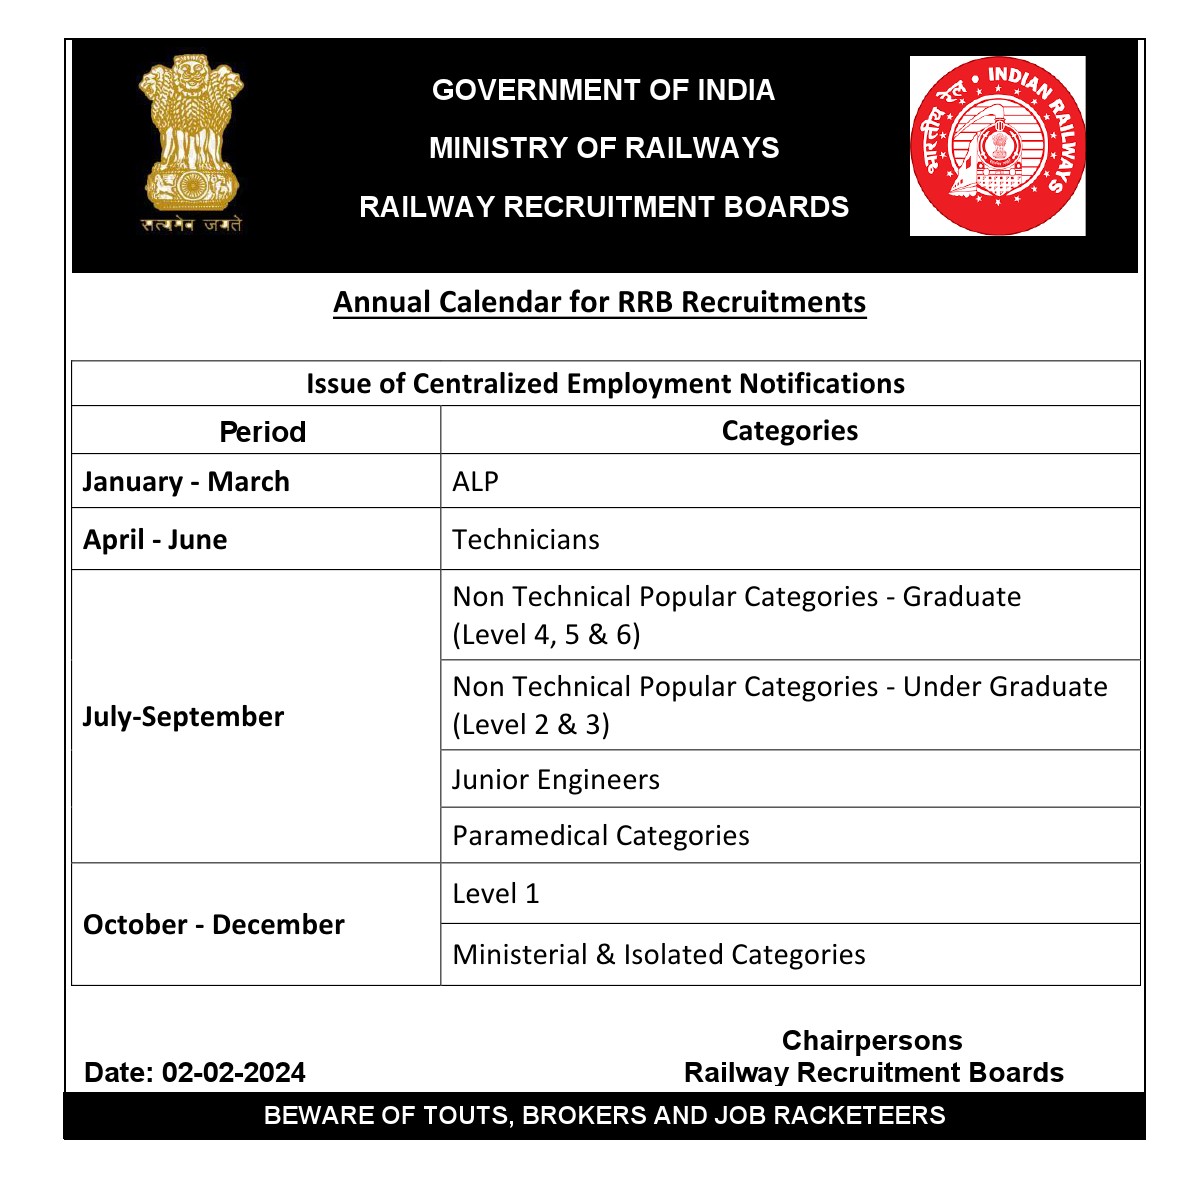 Tentative Annual Calendar for RRB Recruitments - Notification Image 1